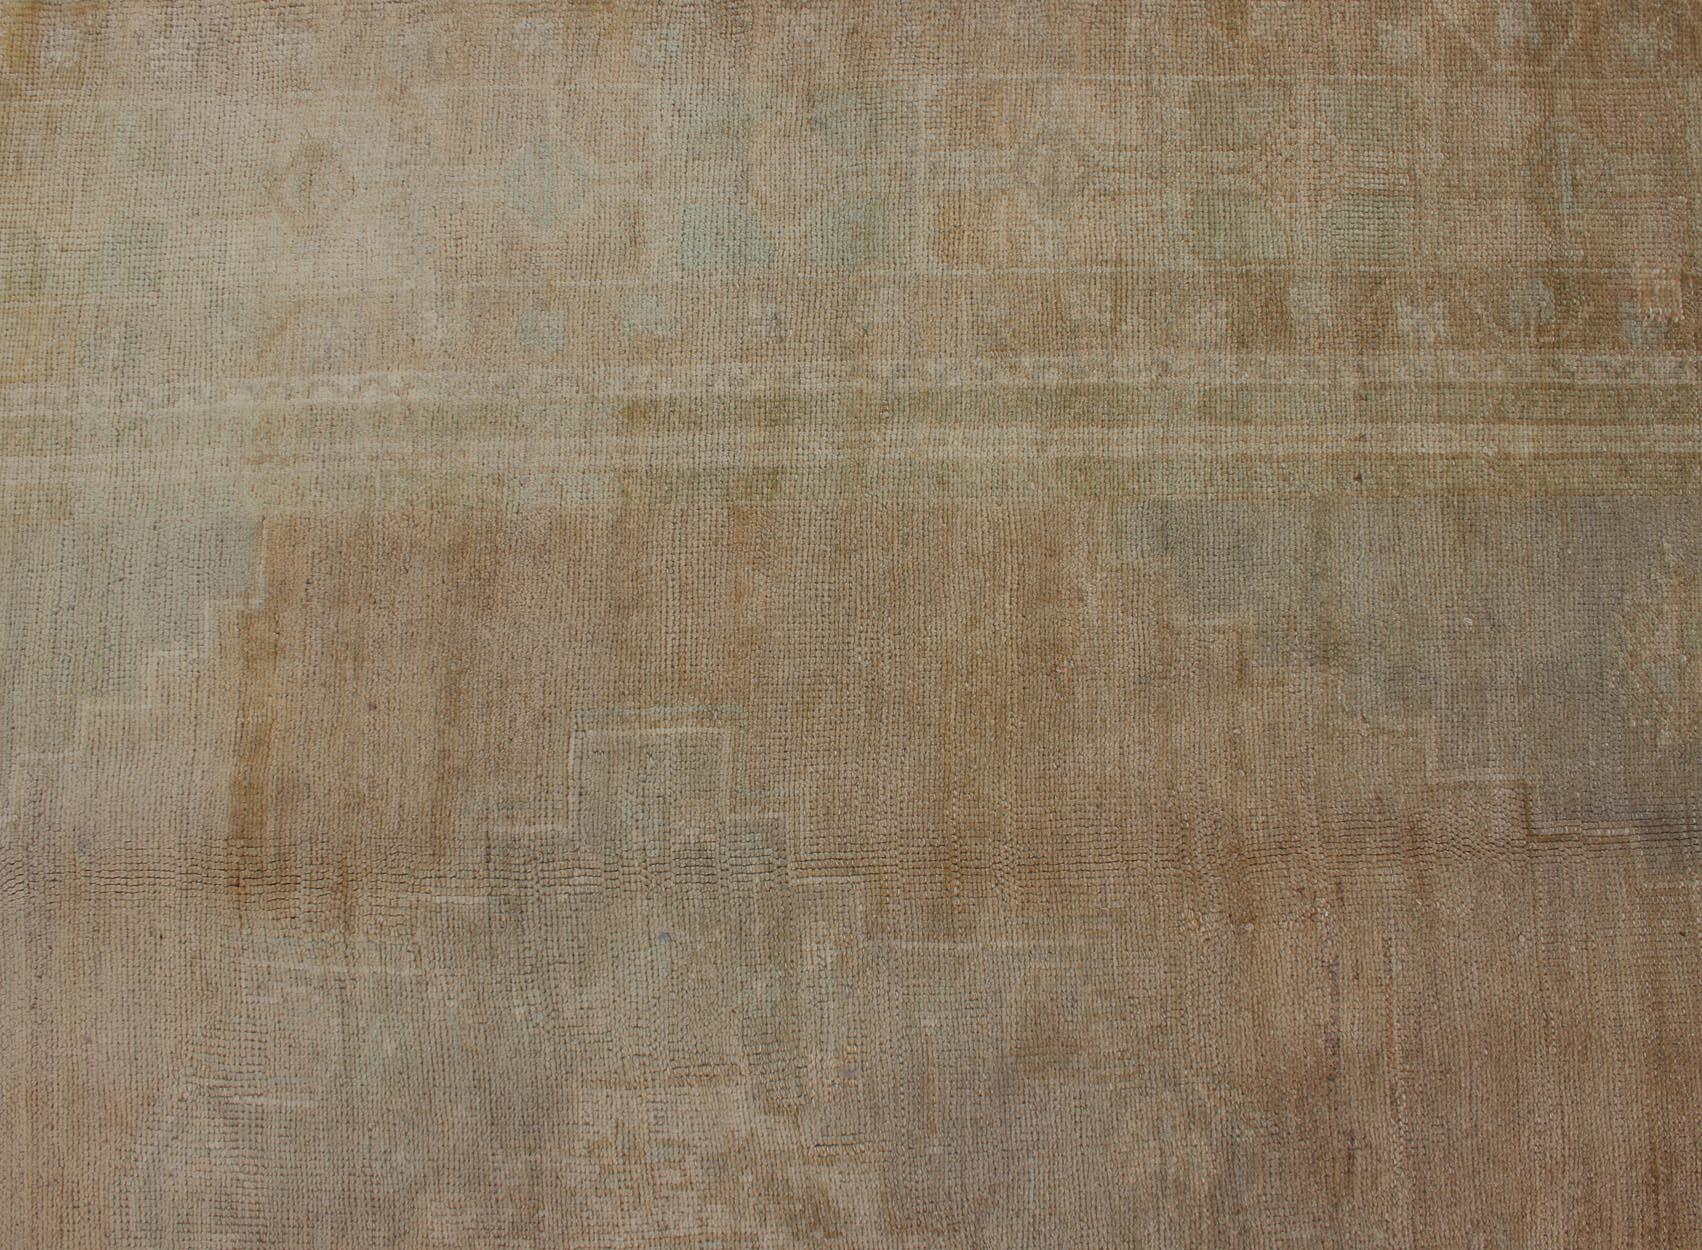 Faded Vintage Turkish Oushak Medallion Rug in Taupe, Tan, Gray 2